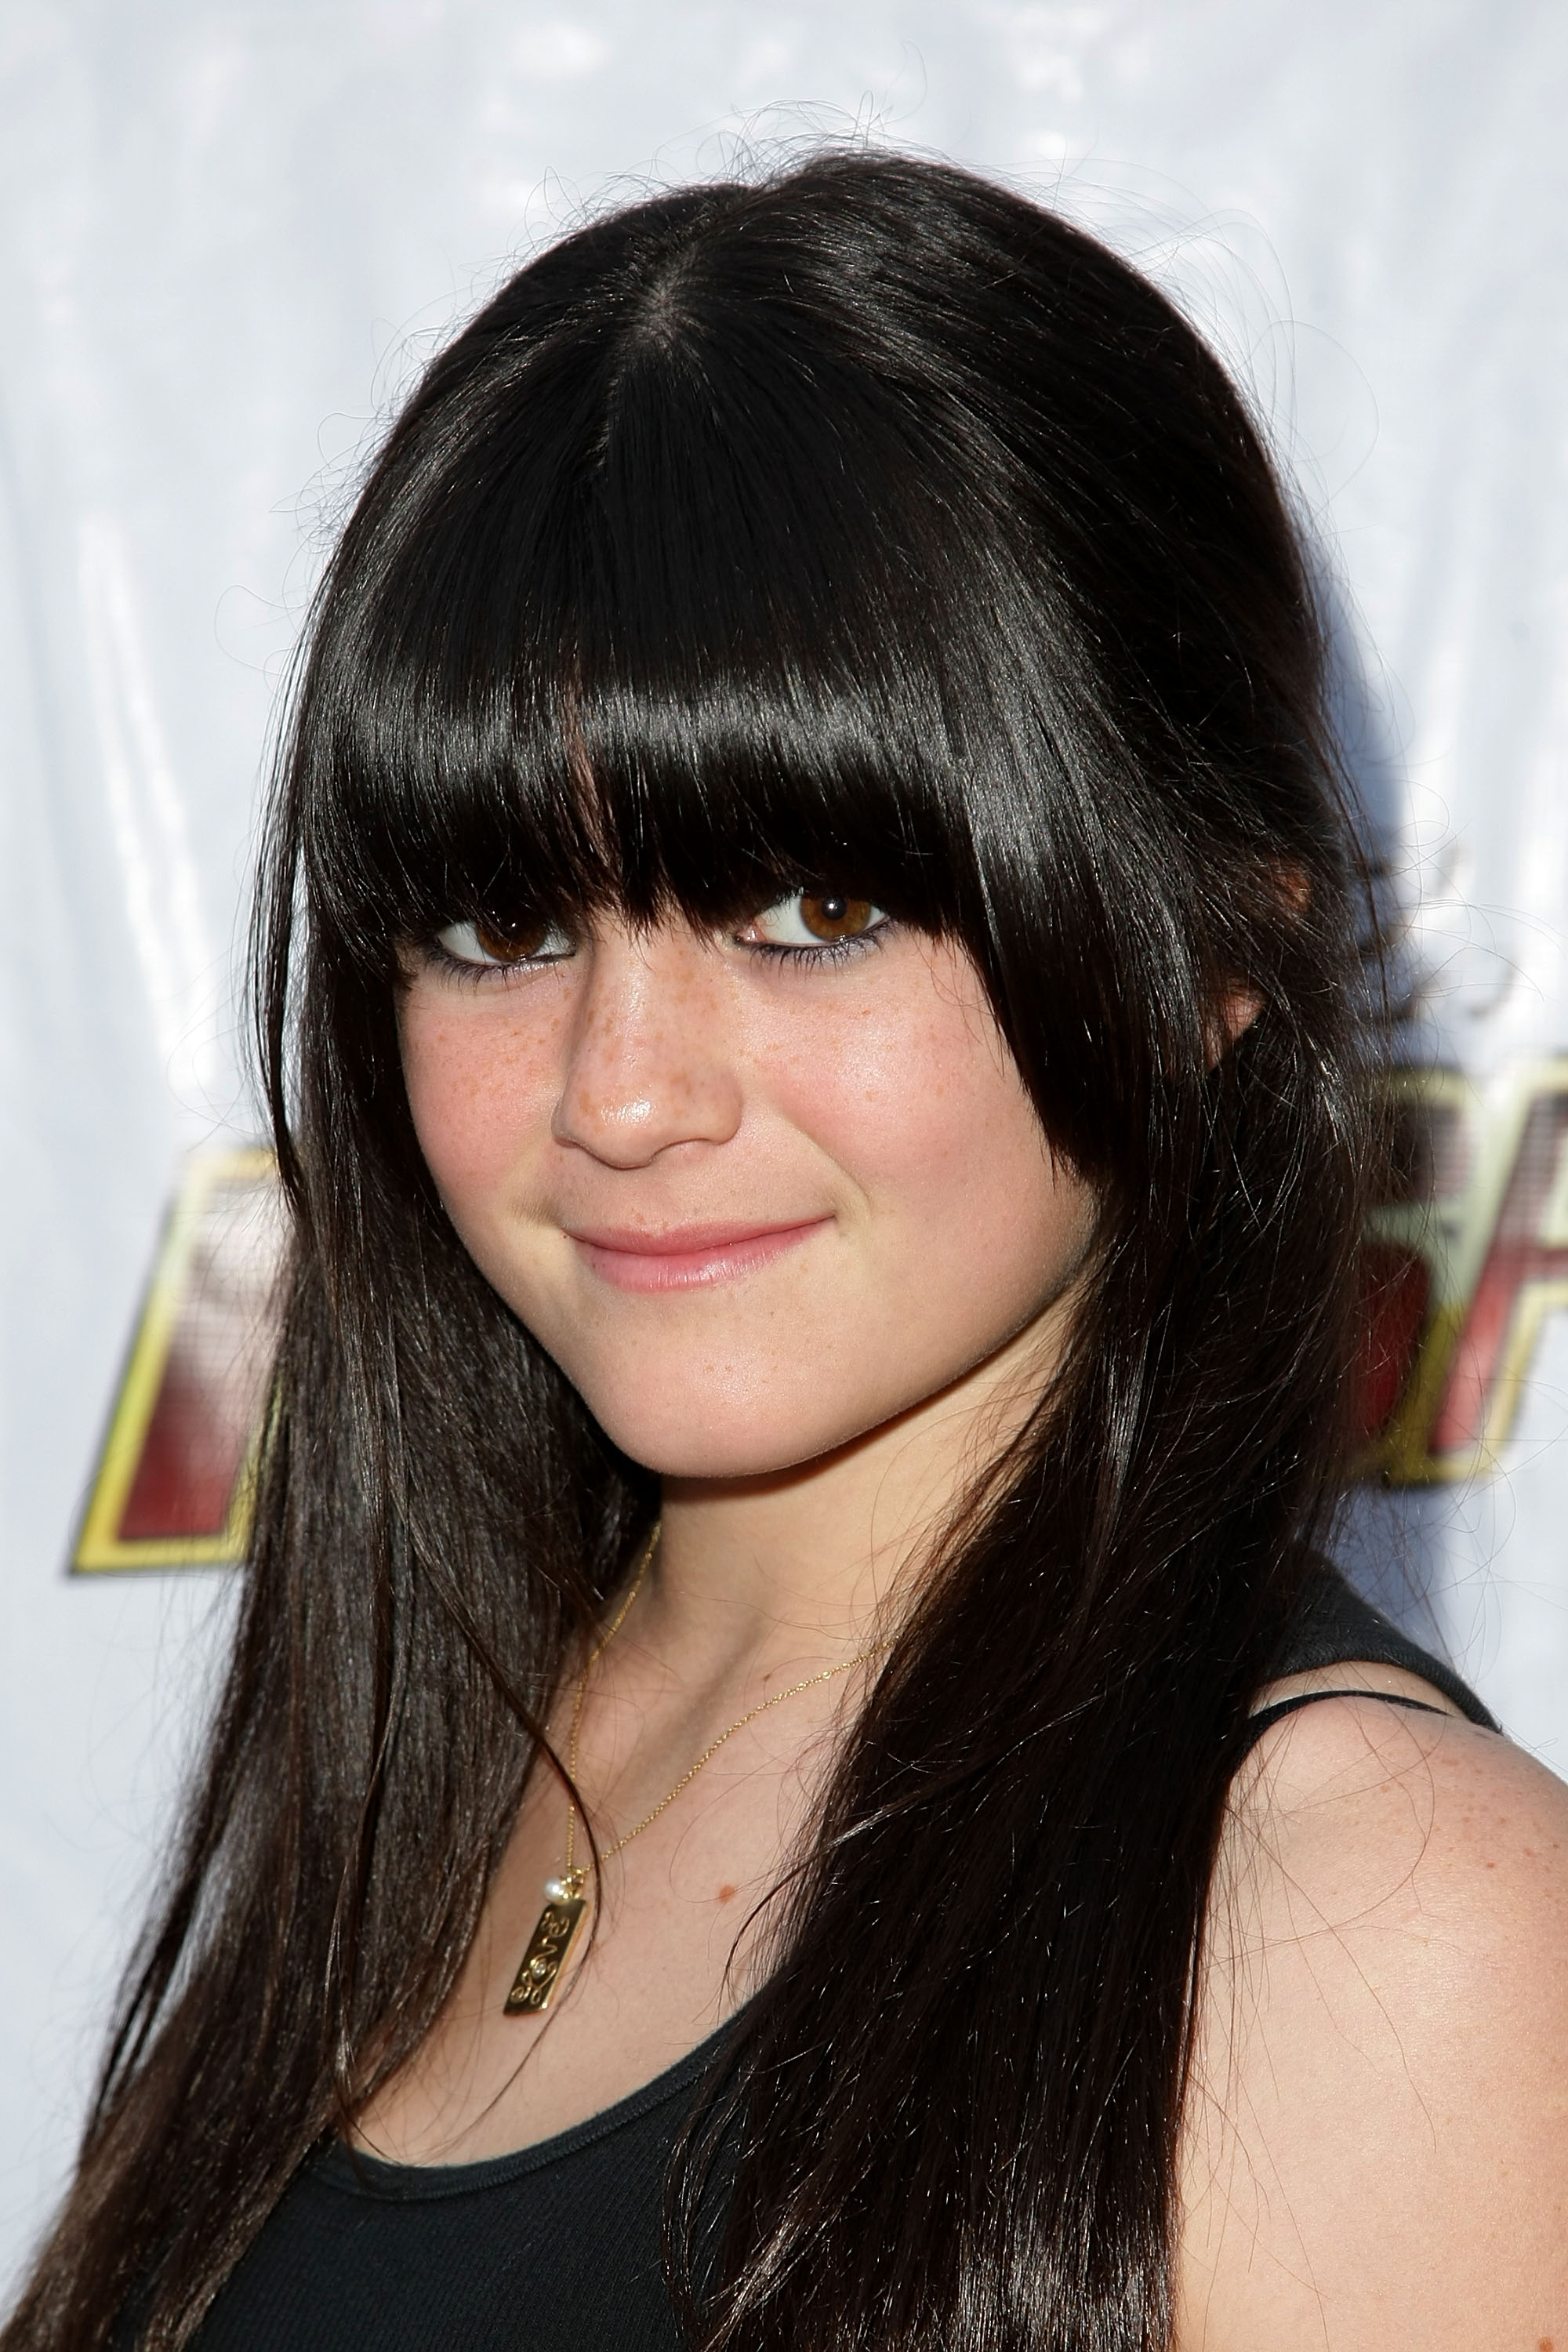 Kylie Jenner at 102.7's KIIS-FM's Wango Tango on May 9, 2009, in Irvine, California. | Source: Getty Images